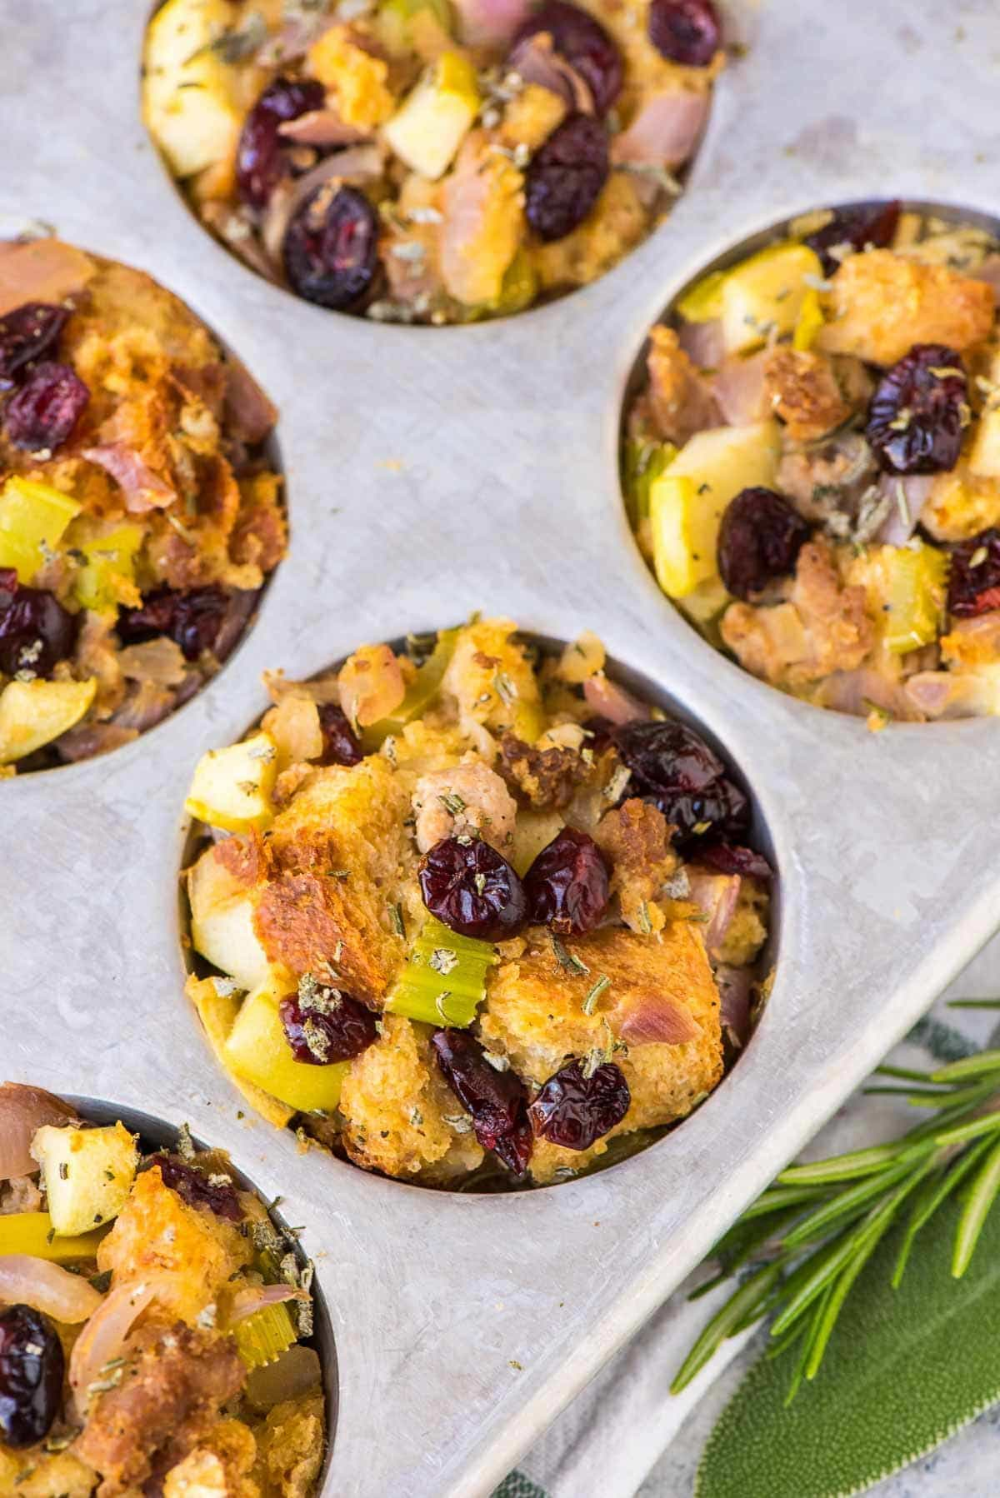 Stuffing Muffins with Sausage and Apples {Delicious!} - WellPlated.com -   19 stuffing muffins easy ideas